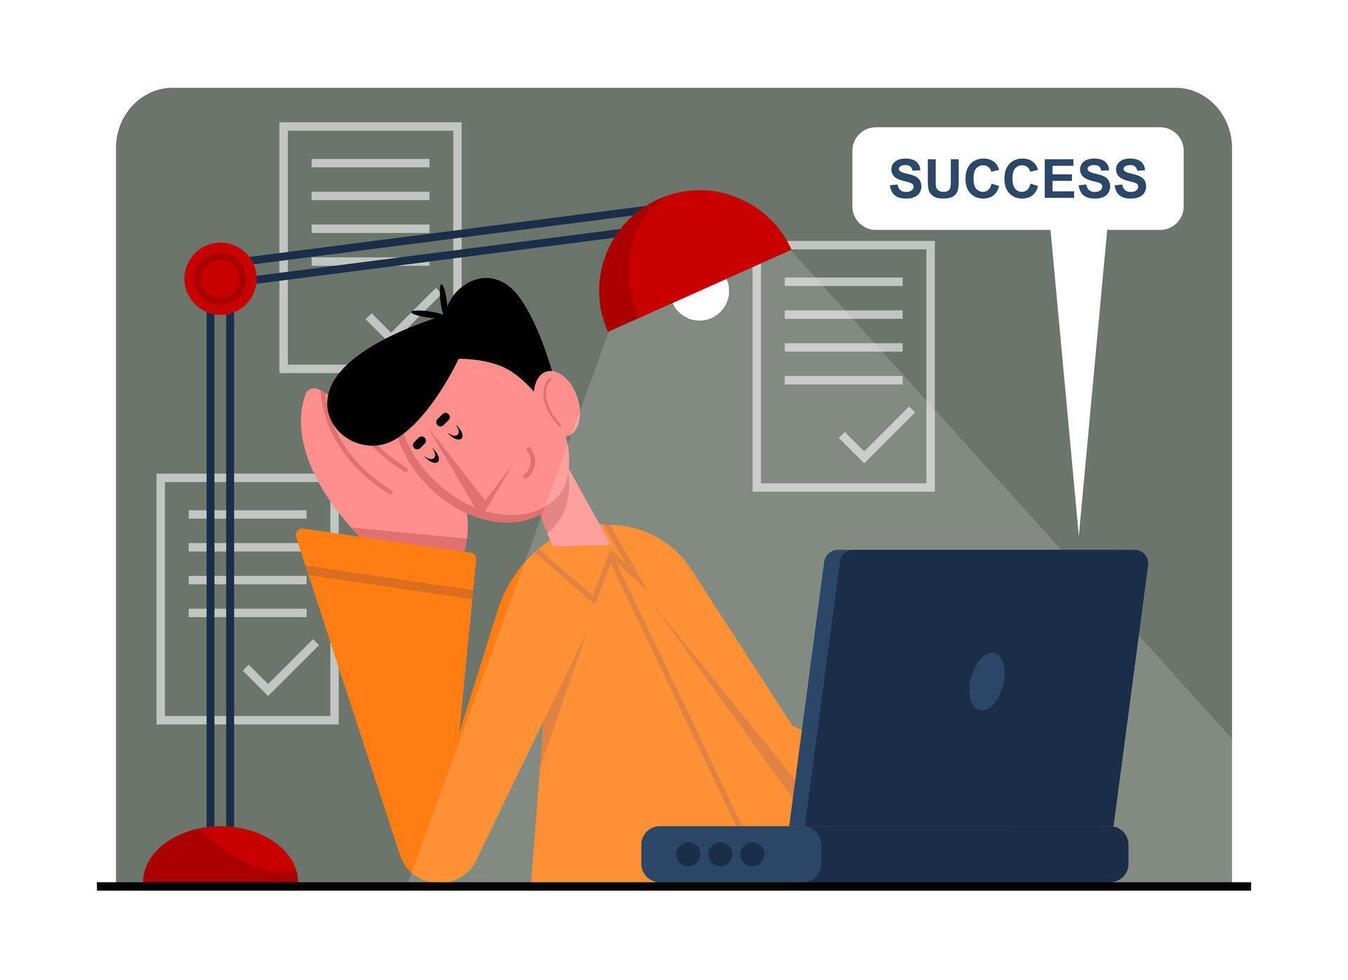 Male working at night, sitting at laptop and sleeping. People succeed at work vector